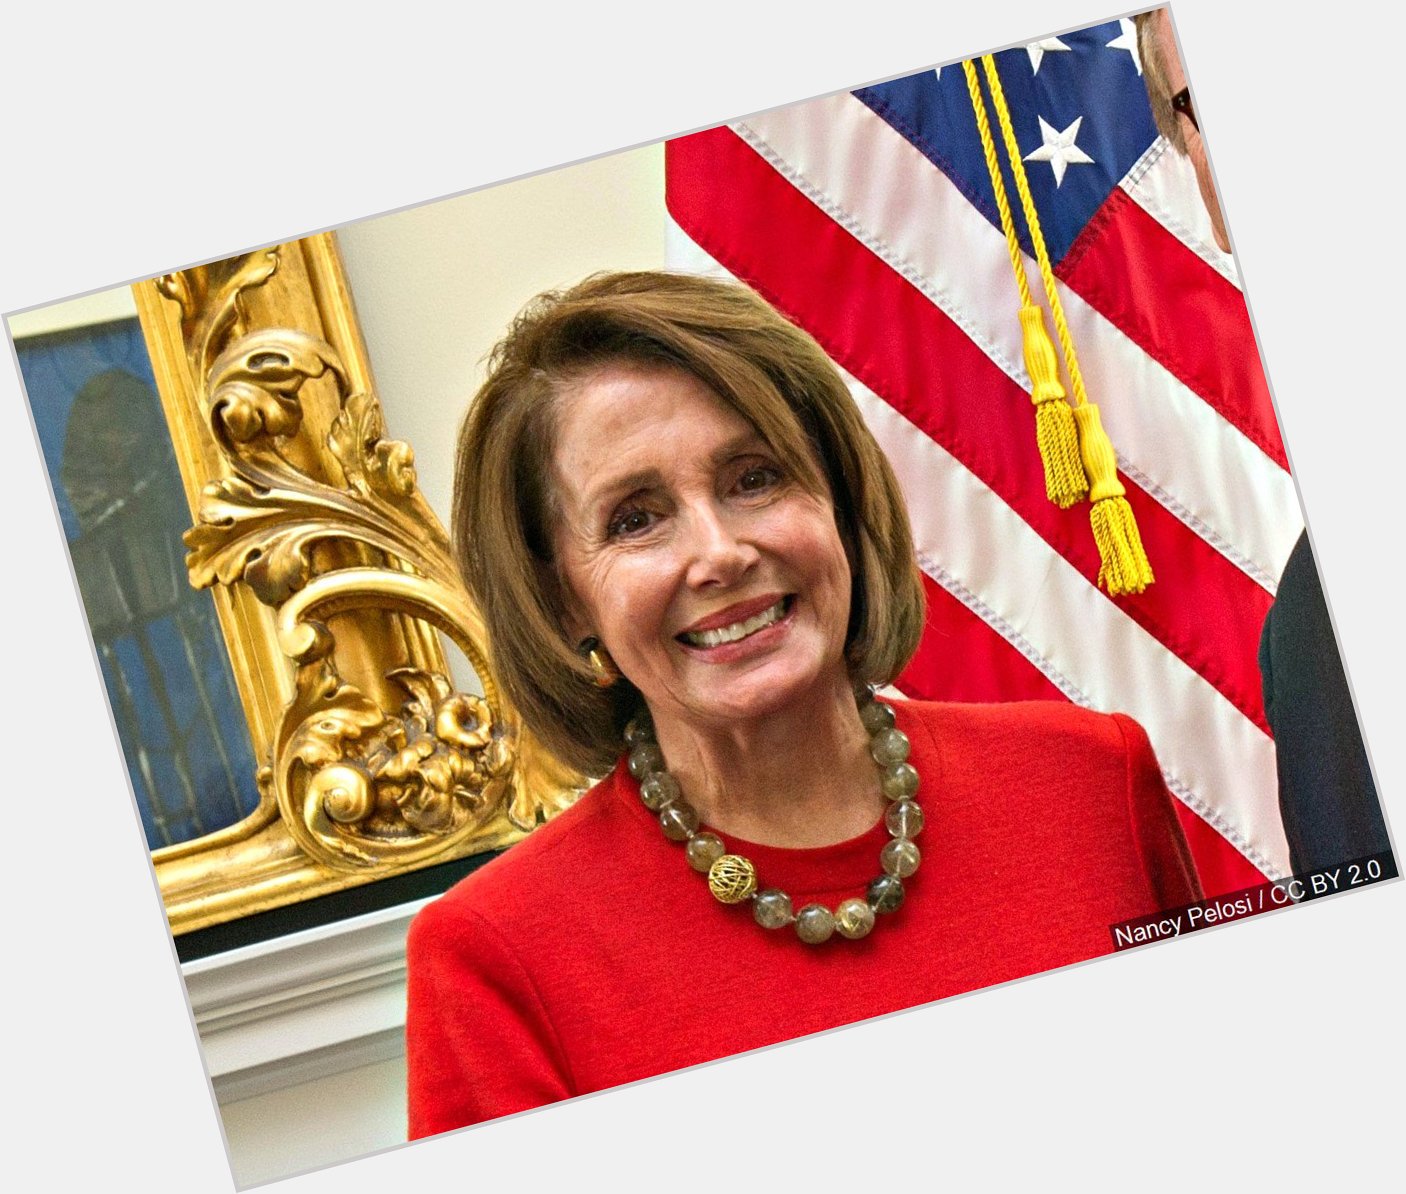    HAPPY BIRTHDAY to House Speaker Nancy Pelosi who is 79 years young today.    